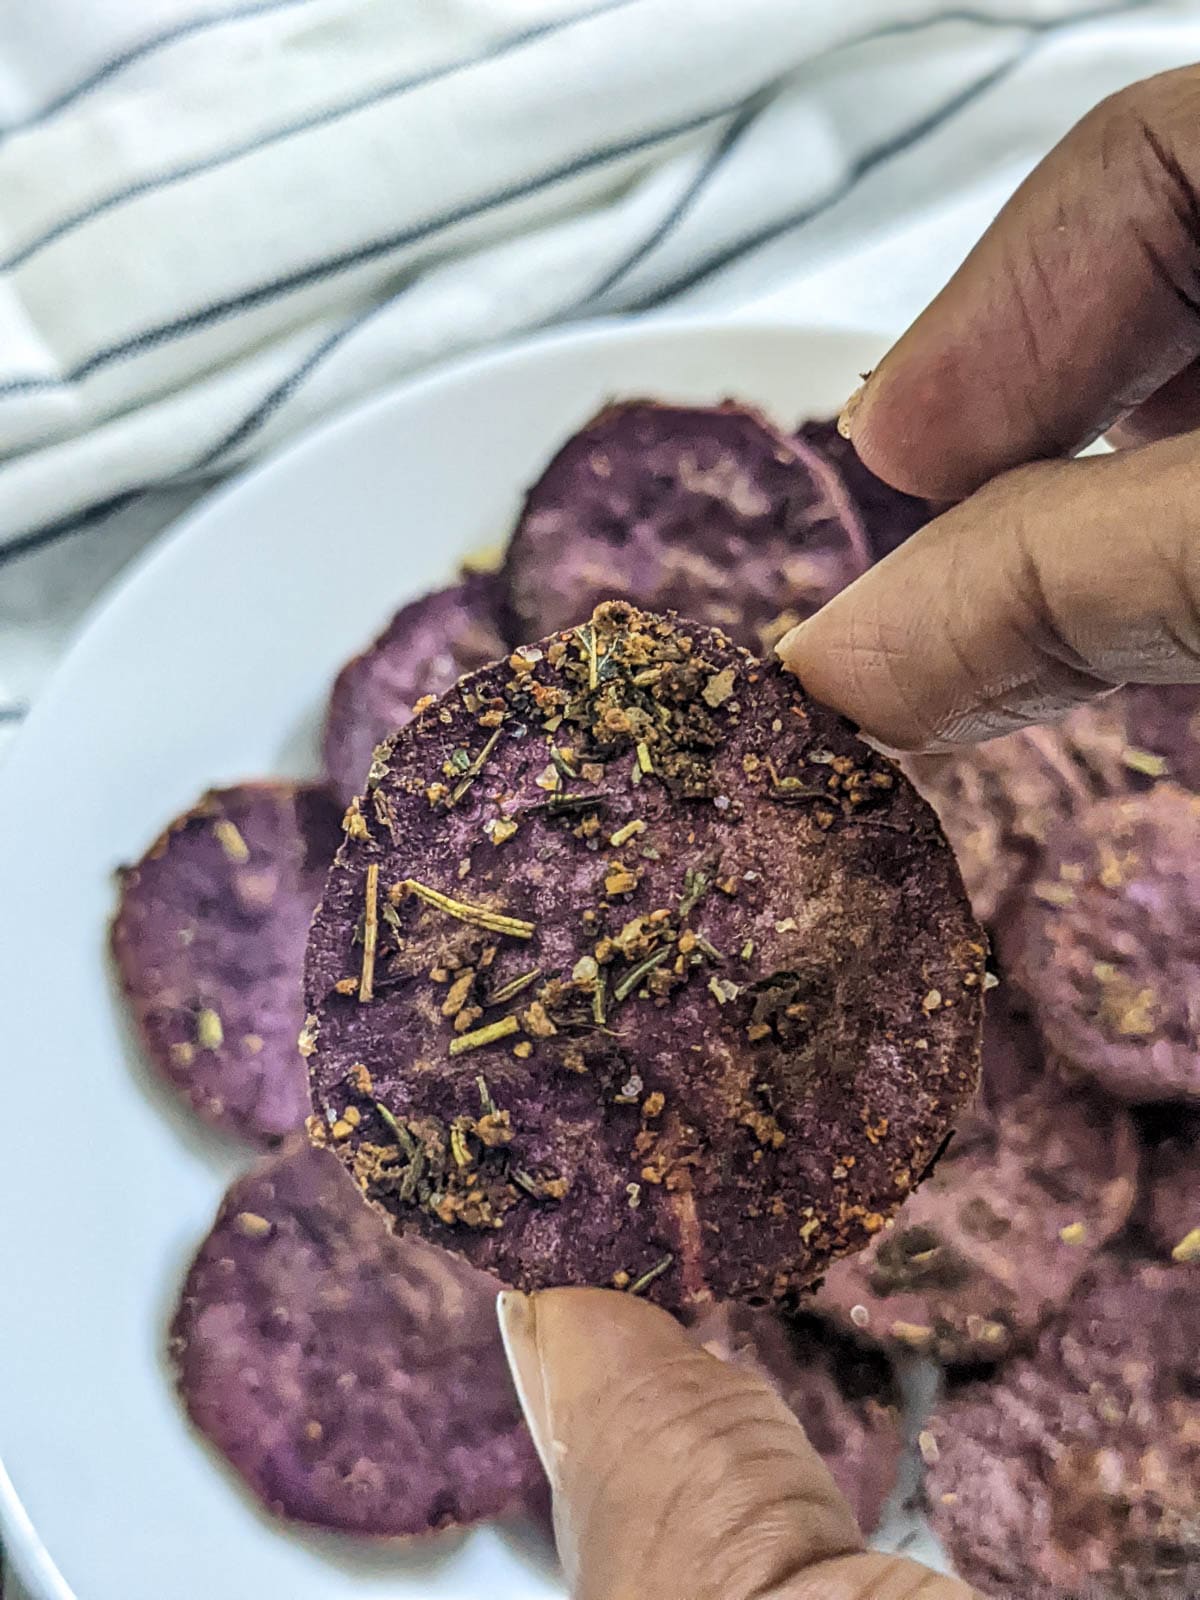 One Medium sliced purple sweet potato slice in close up  with seasoning and air fried, held in fingers with other slices blurred in the background.